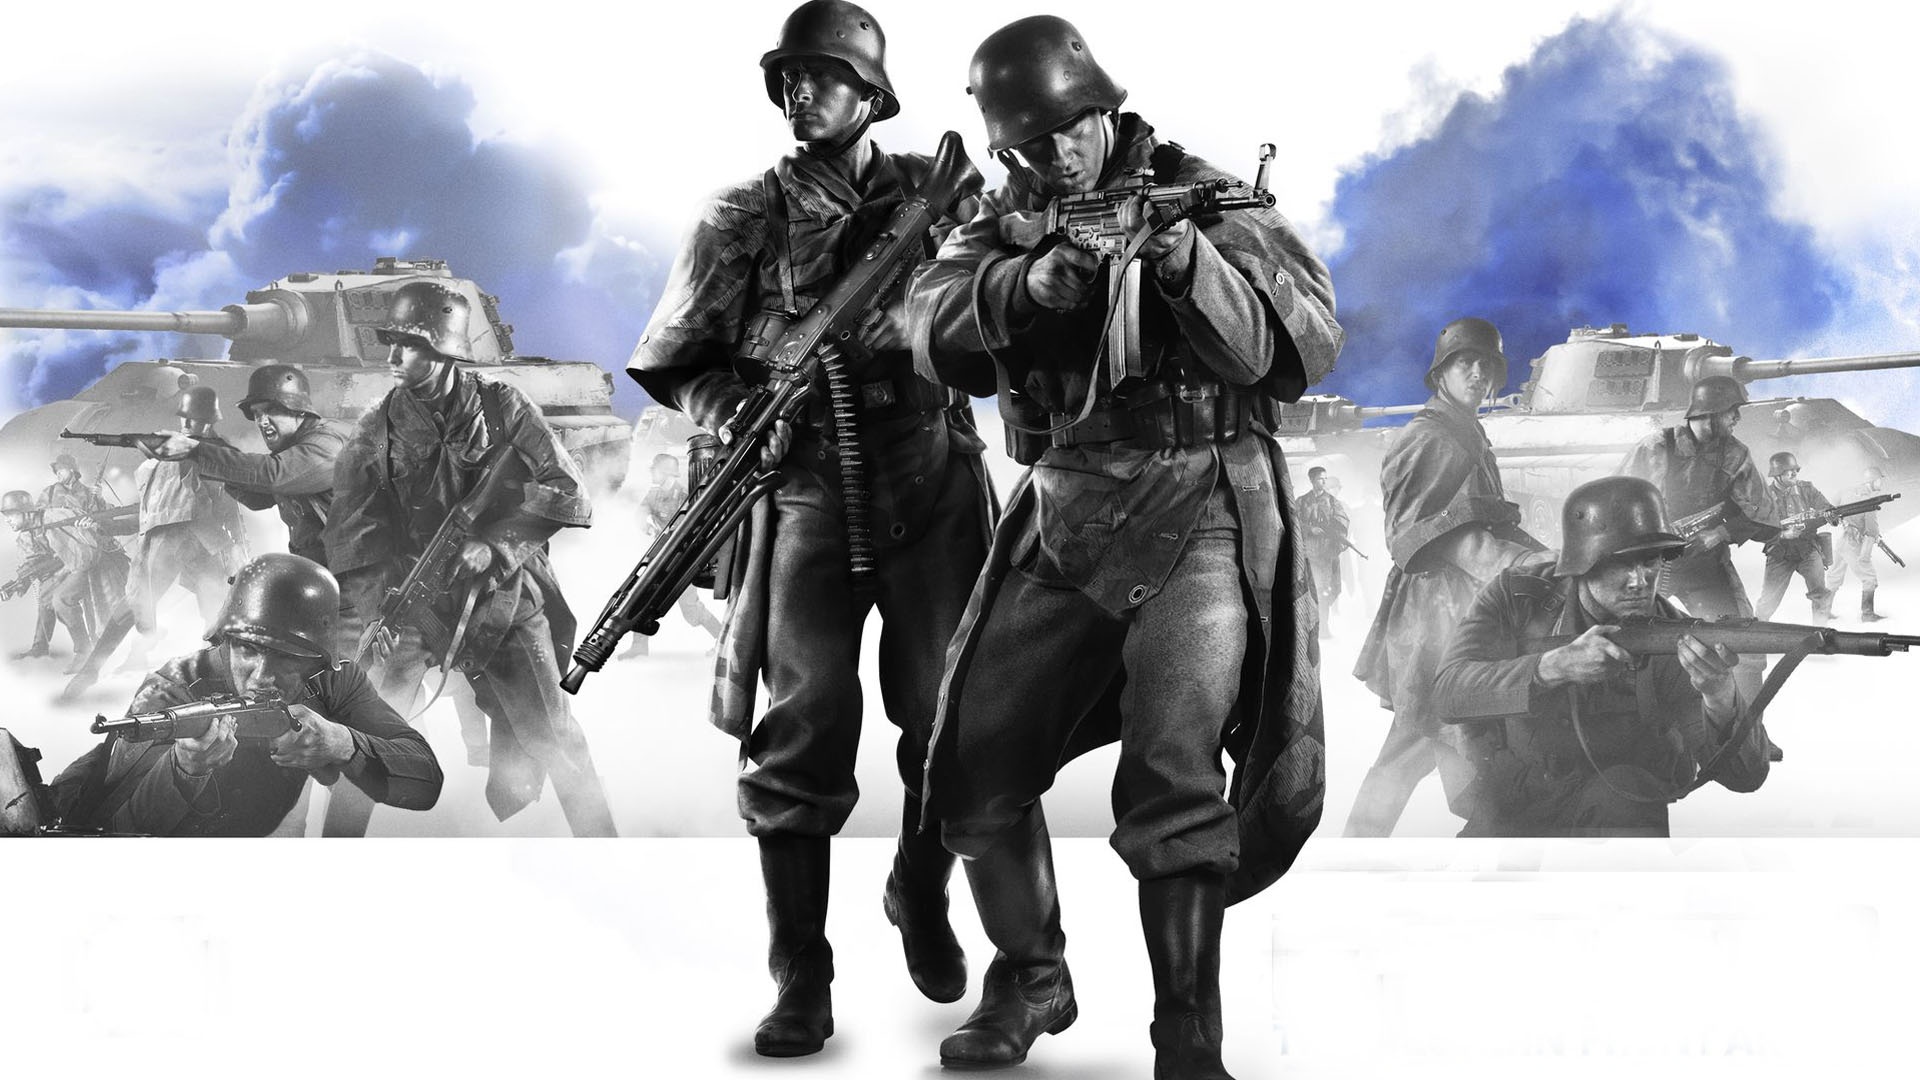 Company Of Heroes 2 Wallpapers